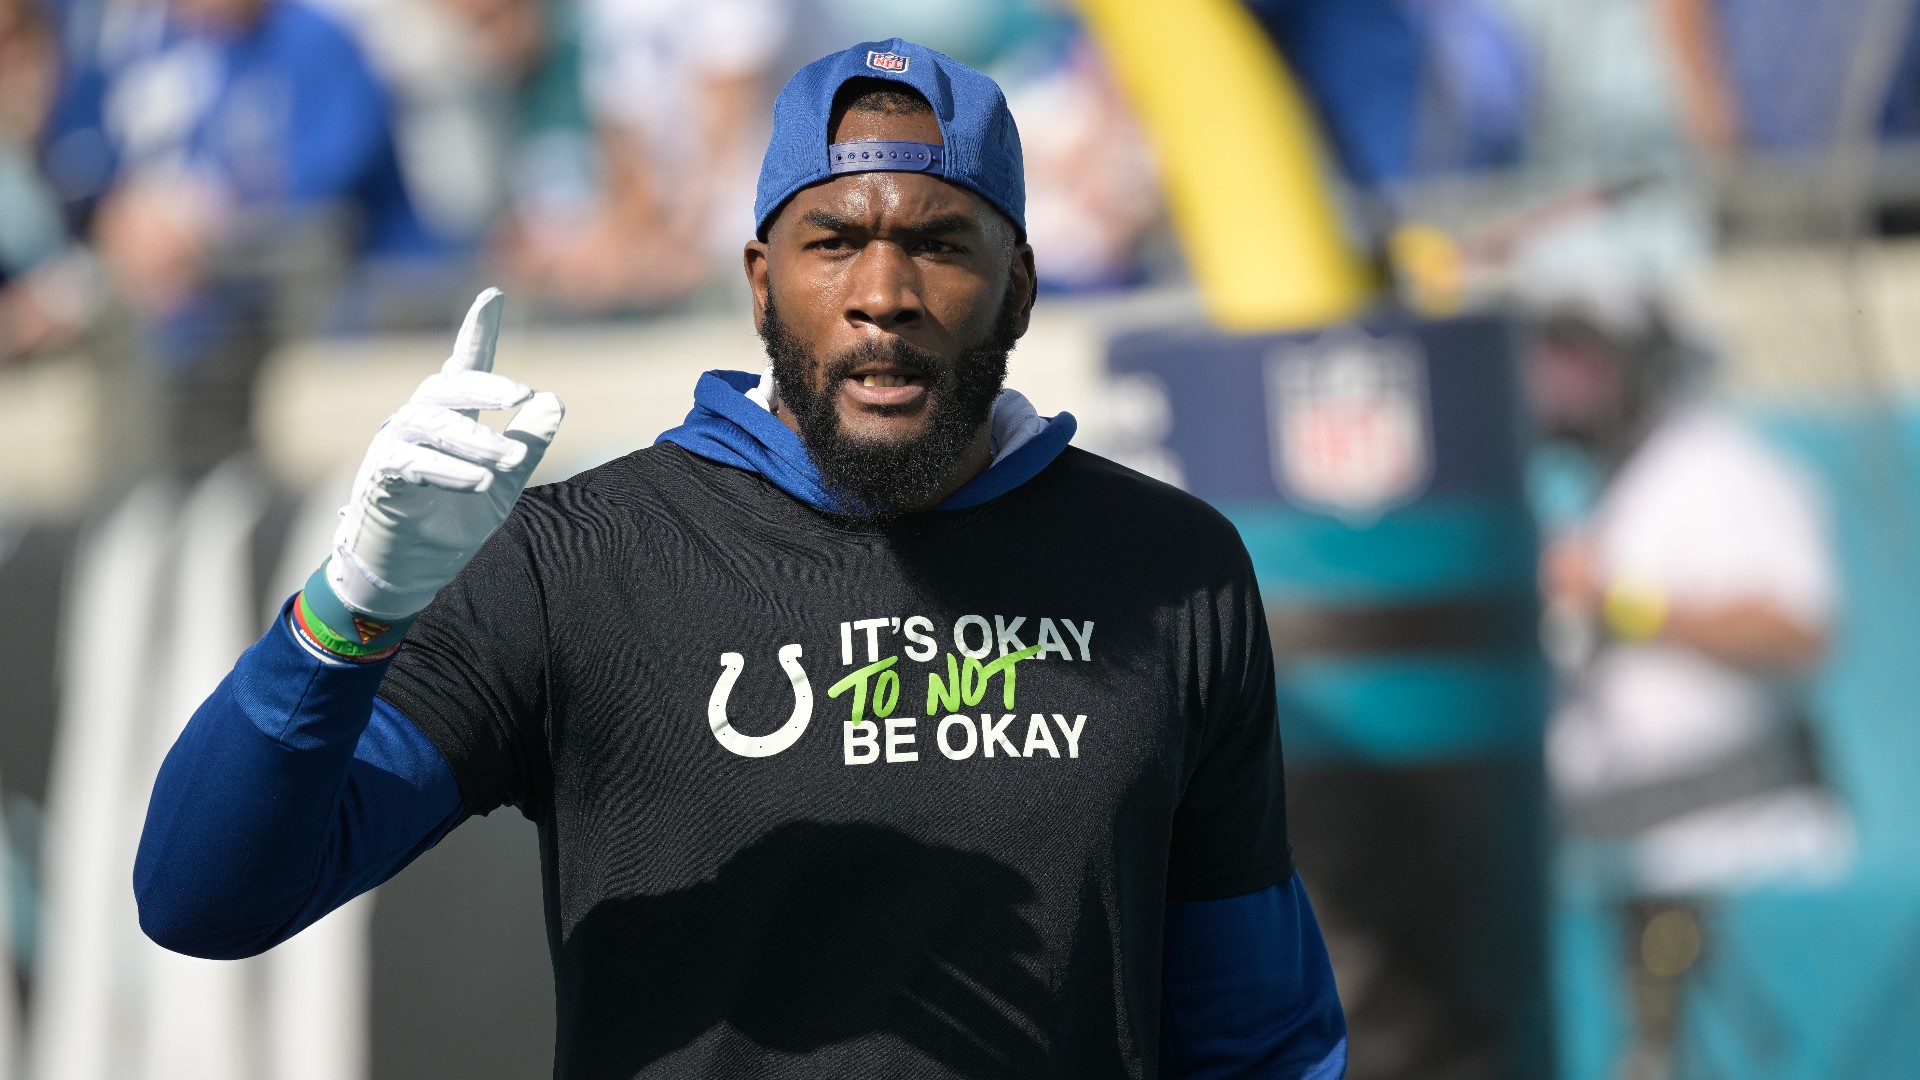 Leonard underwent back surgery in the offseason, and the Colts announced he was placed on the Physically Unable to Perform (PUP) list on July 24.